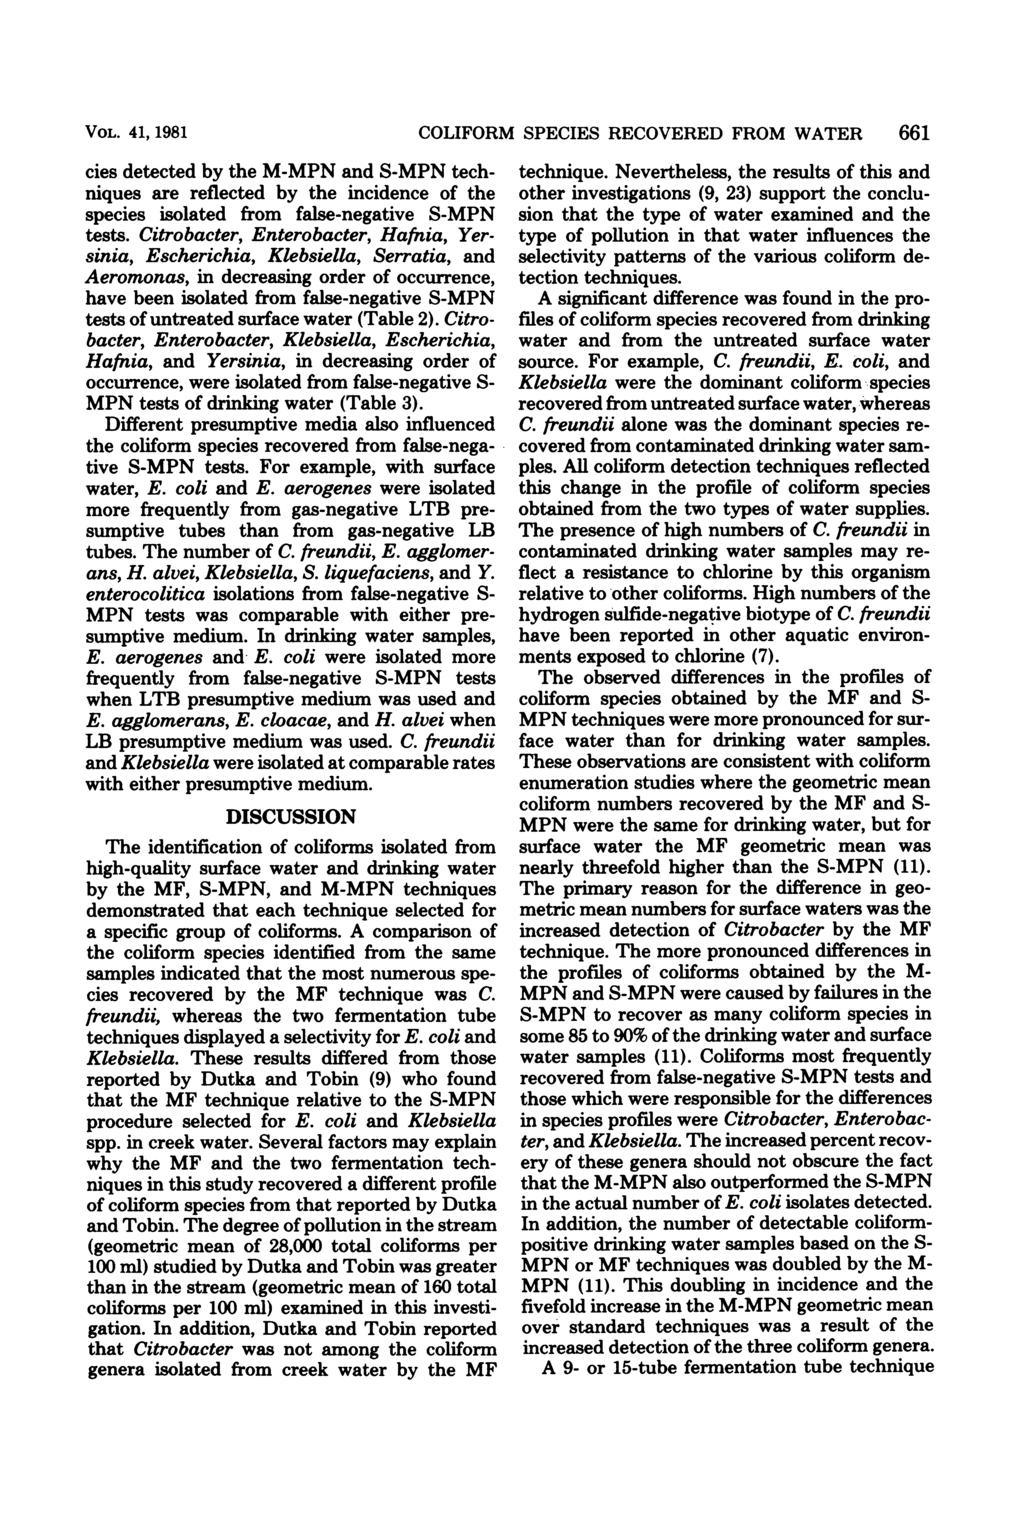 VOL. 41, 1981 cies detected by the M-MPN and S-MPN techniques are reflected by the incidence of the species isolated from false-negative S-MPN tests.